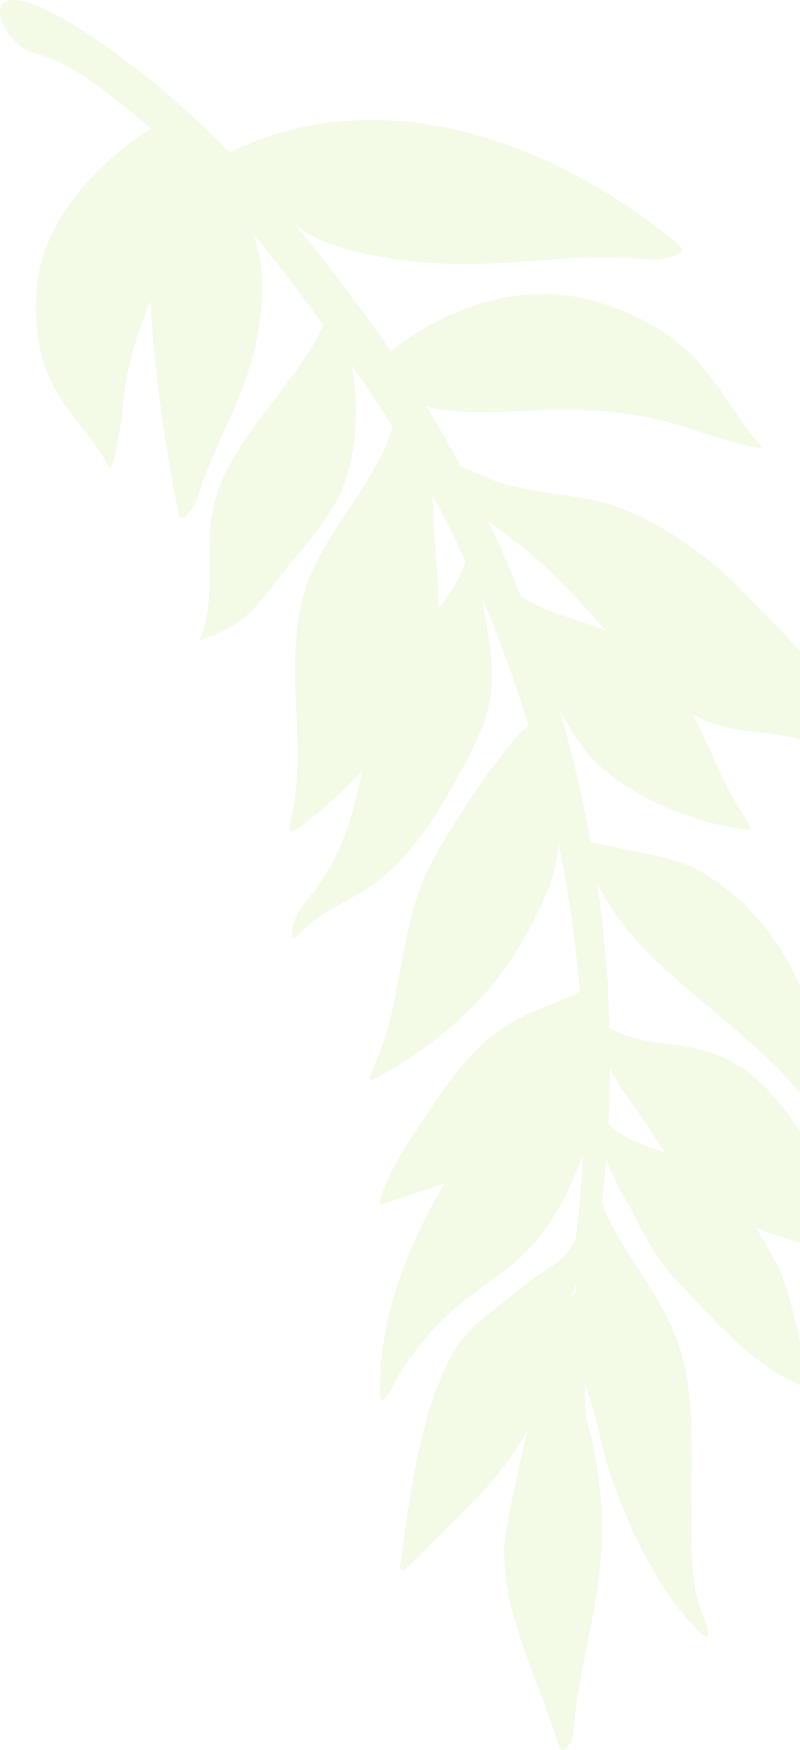 Top Right Leaf Background